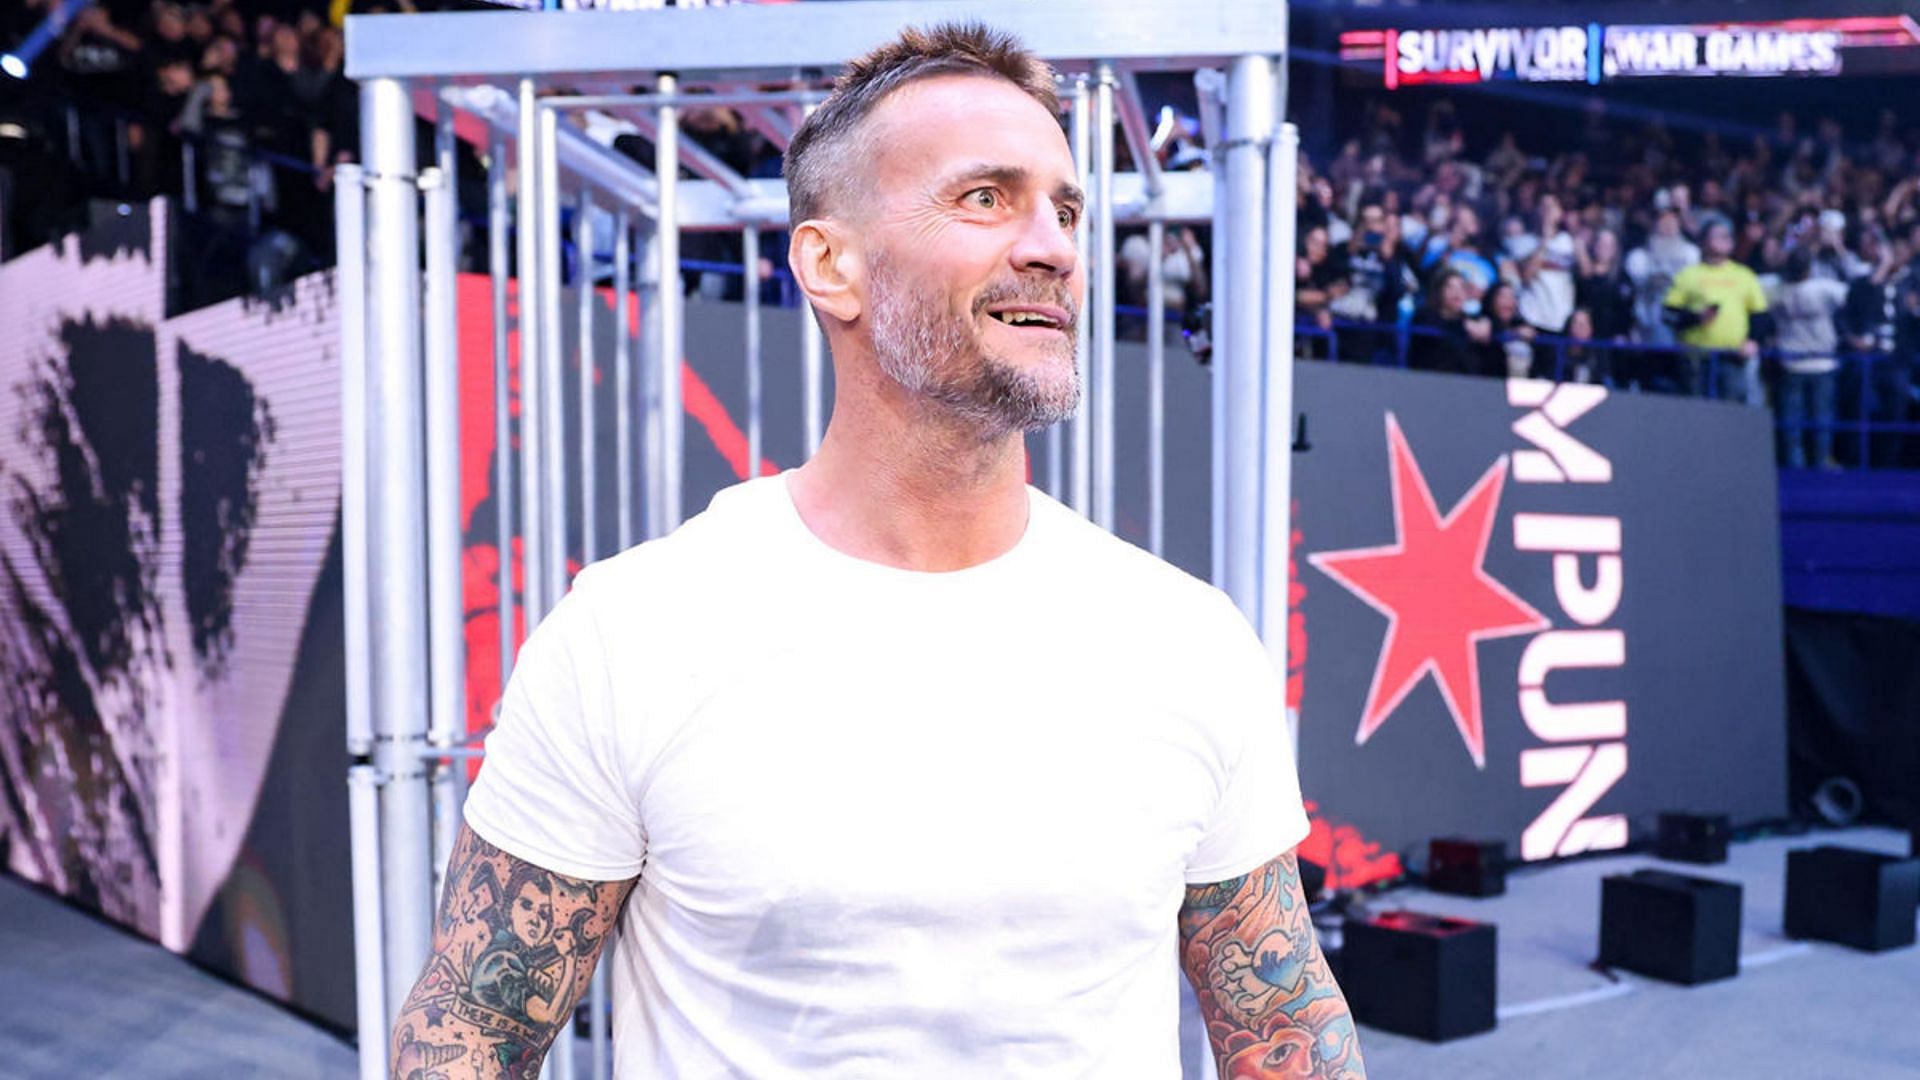 Will CM Punk play a different role in WWE during his recovery?